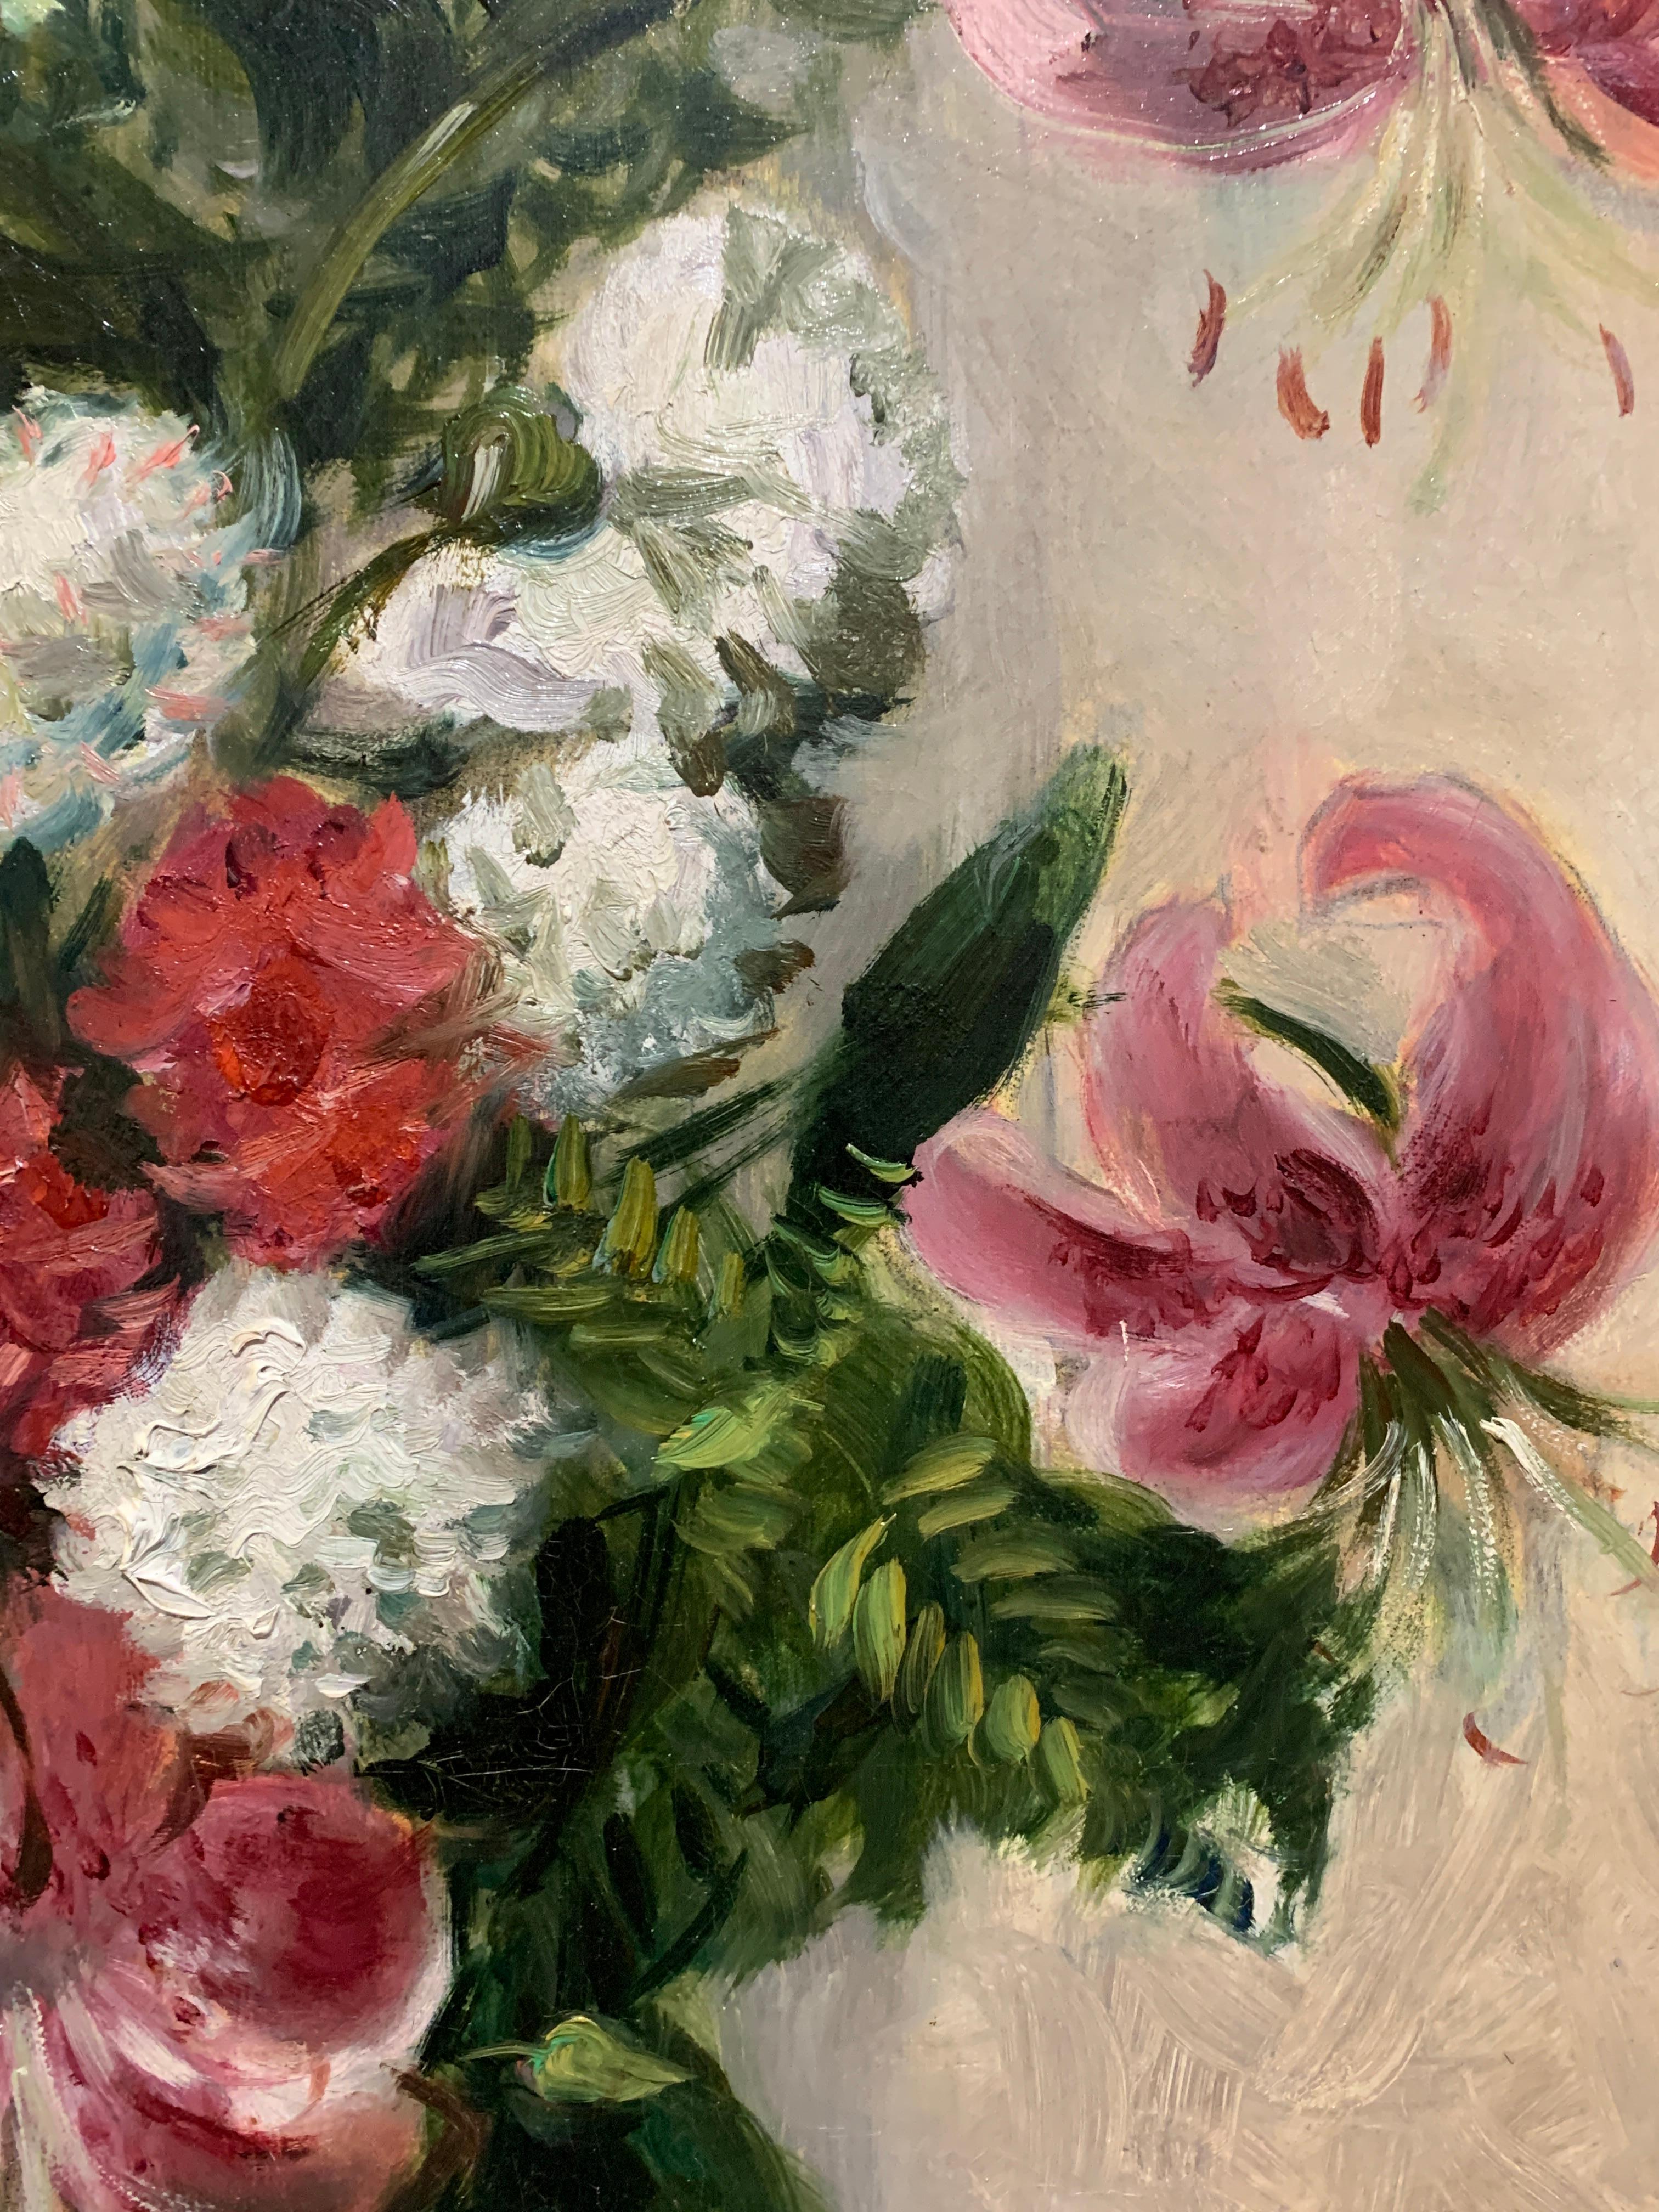 Impressionist still life of Pink, Red and White flowers in an interior. - Brown Still-Life Painting by Jane Herbo